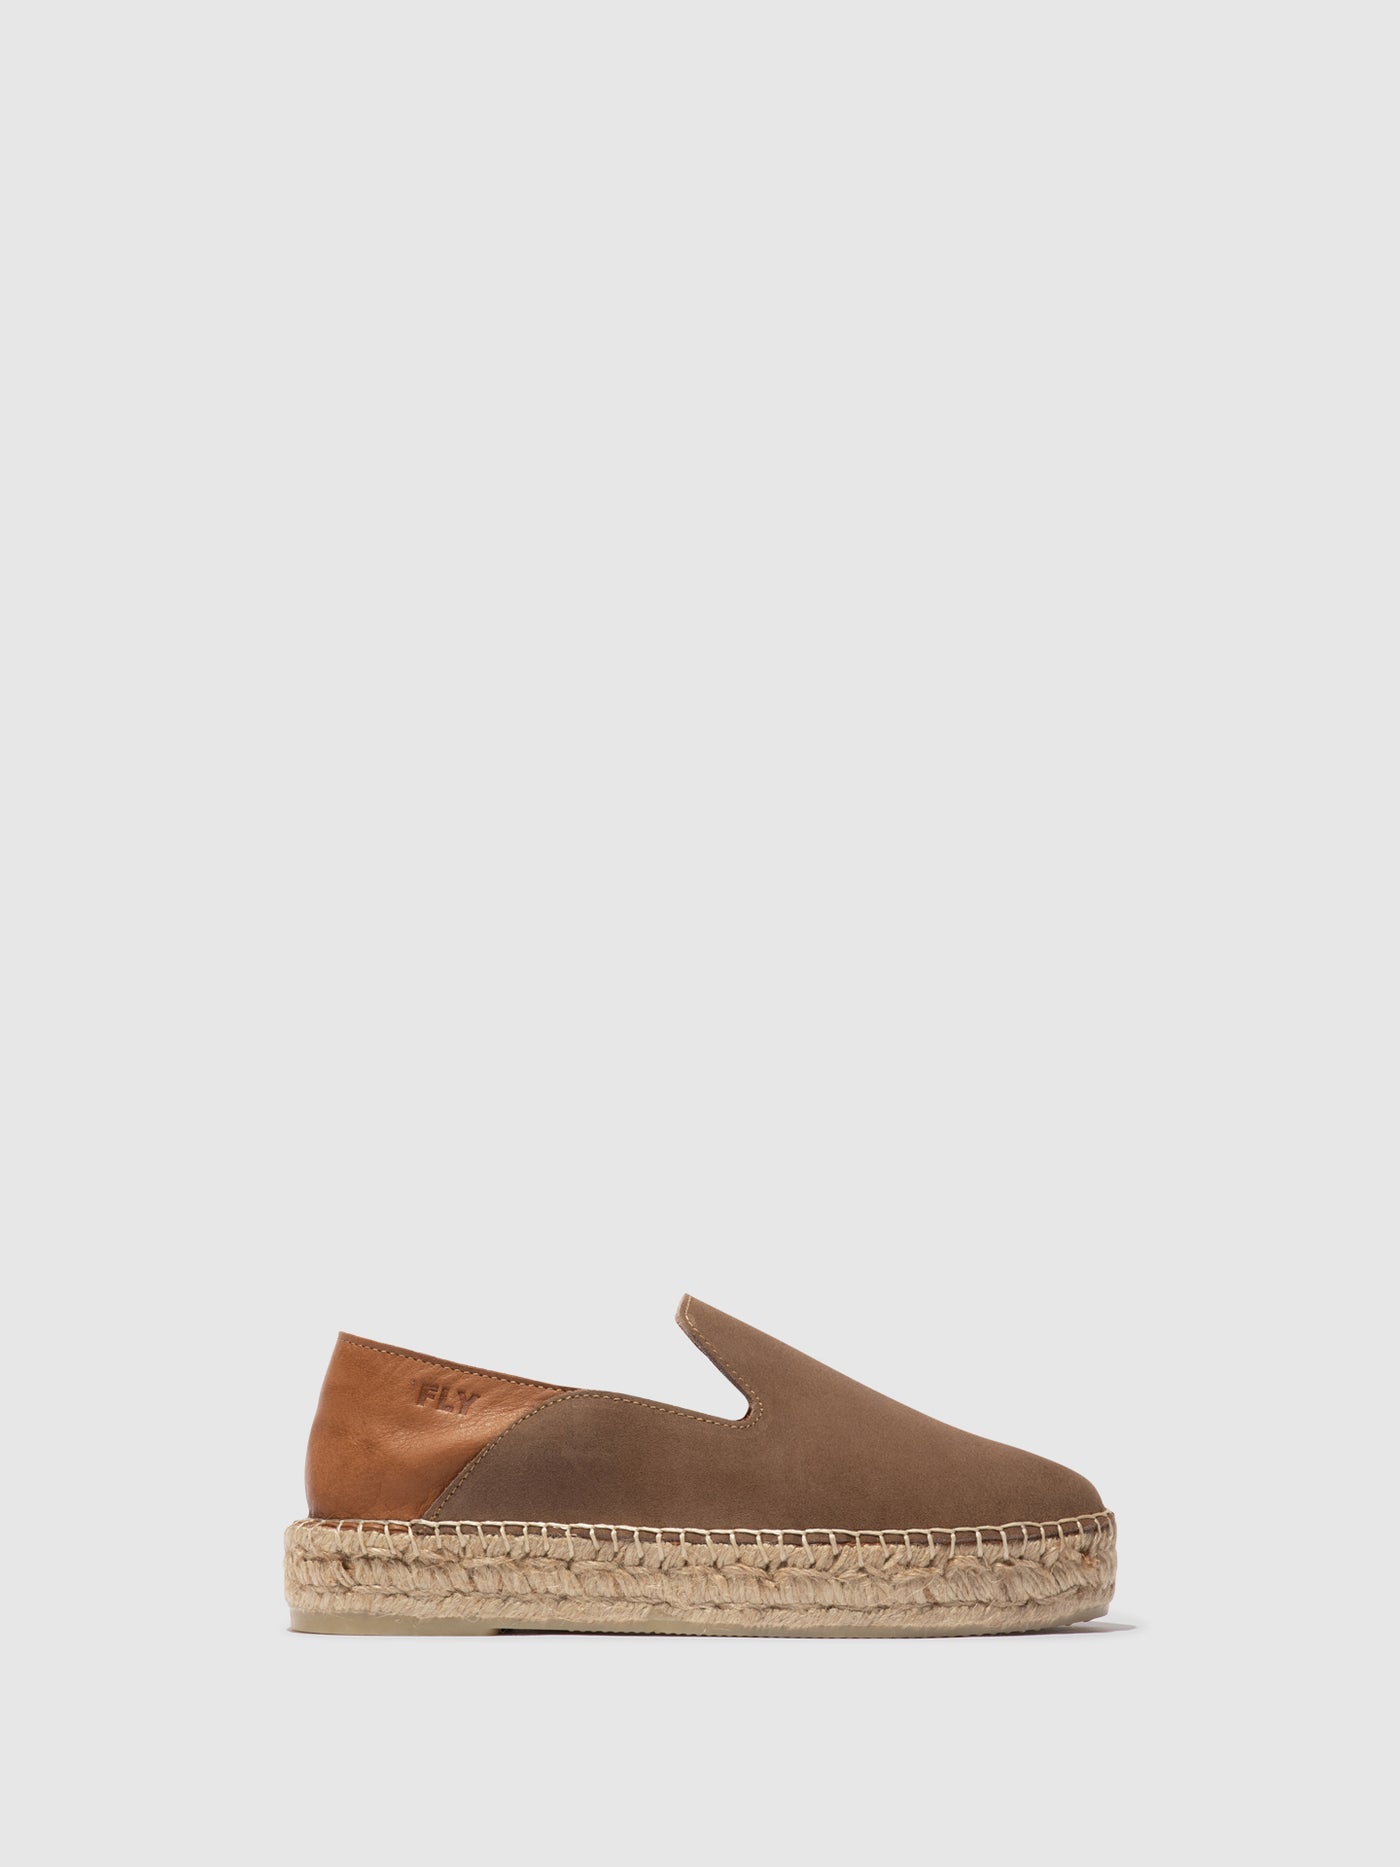 Slip-on Espadrilles PULY522FLY TAUPE/TAN